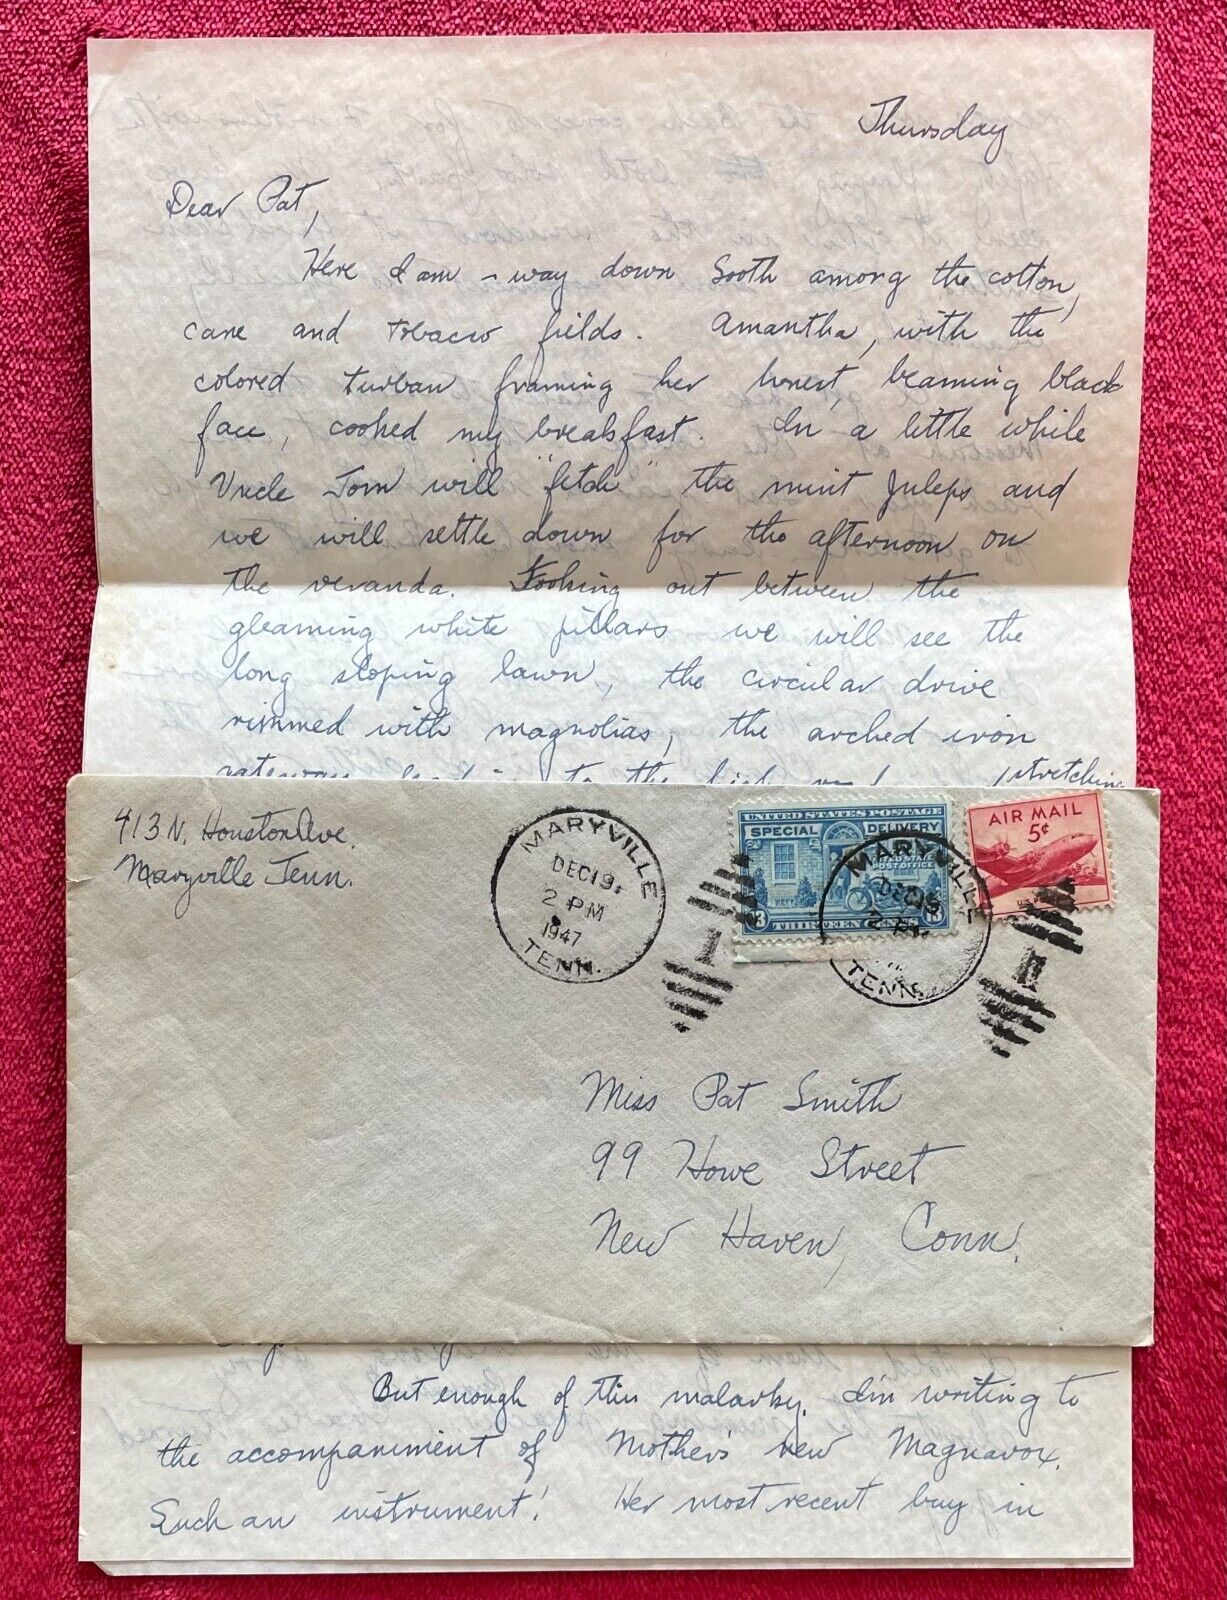 1947 POSTAL COVER SPECIAL DELIVERY & AIRMAIL STAMPS & VERY INTERESTING LETTER